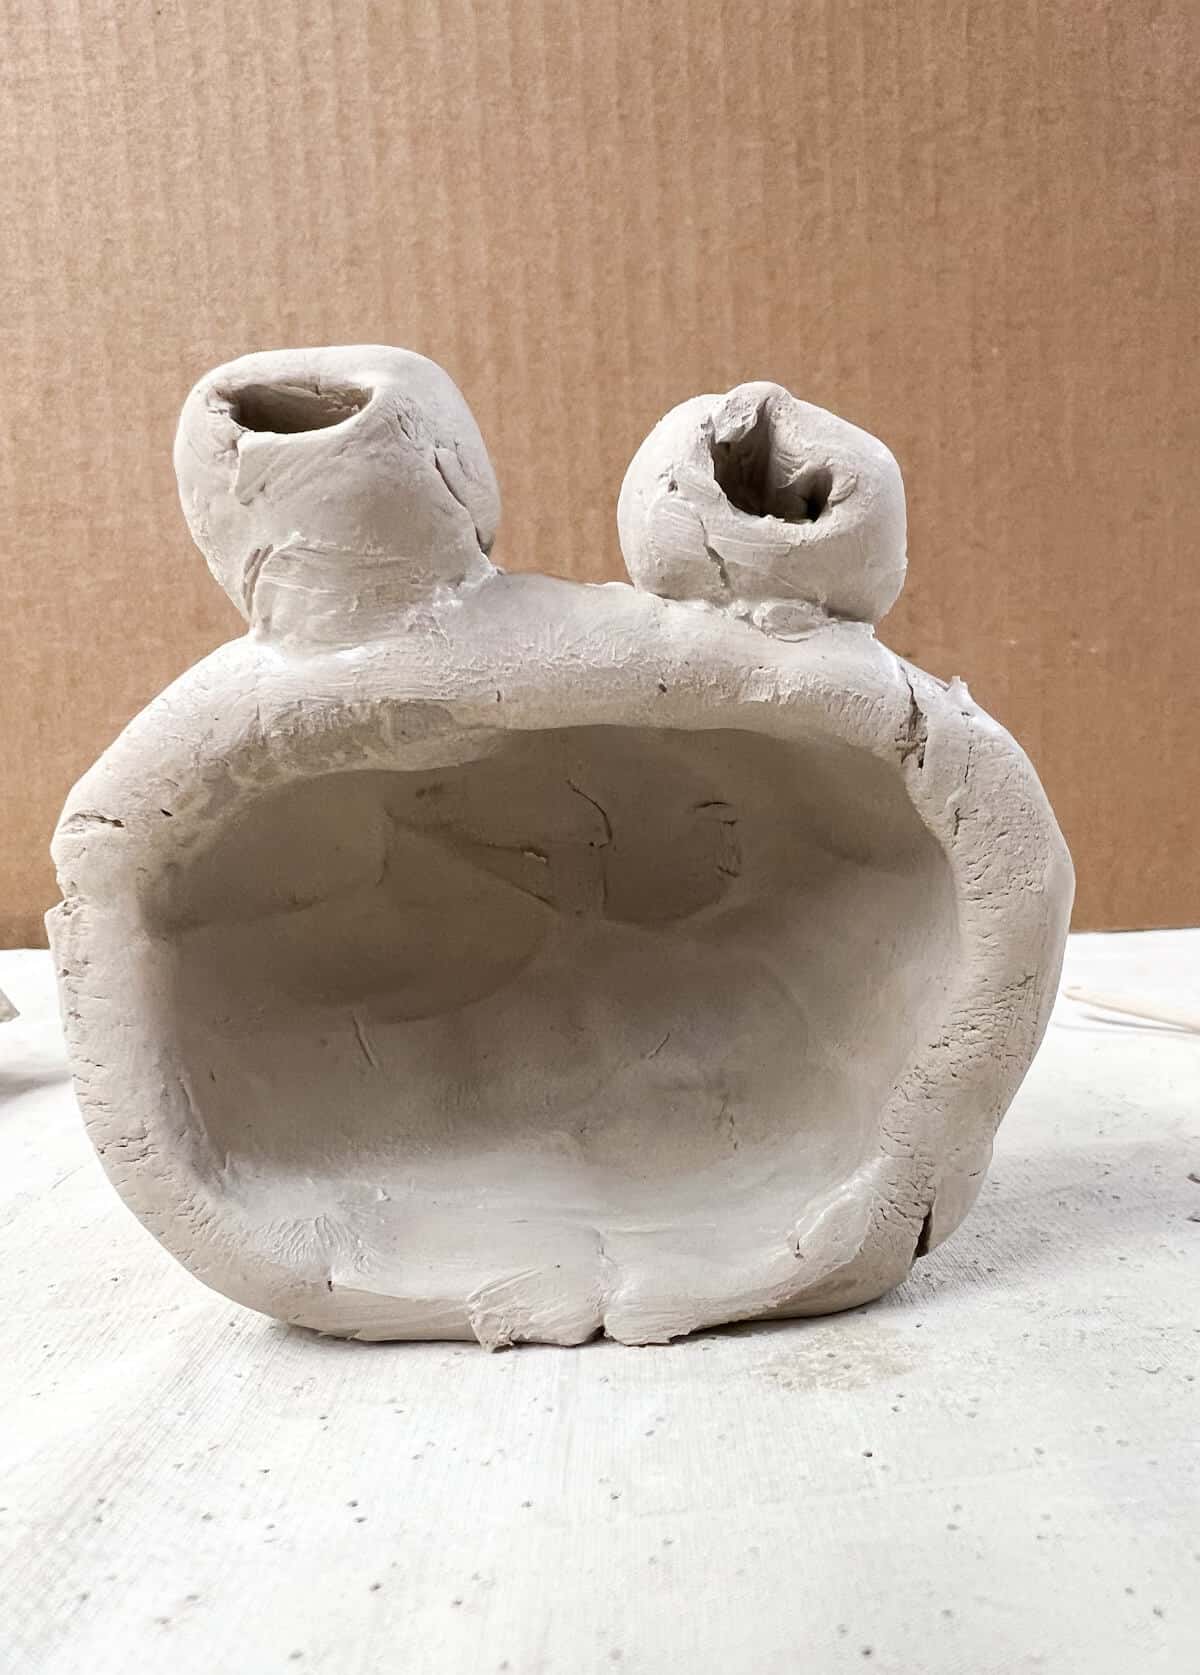 clay monster eyes attached to pinch pot head.